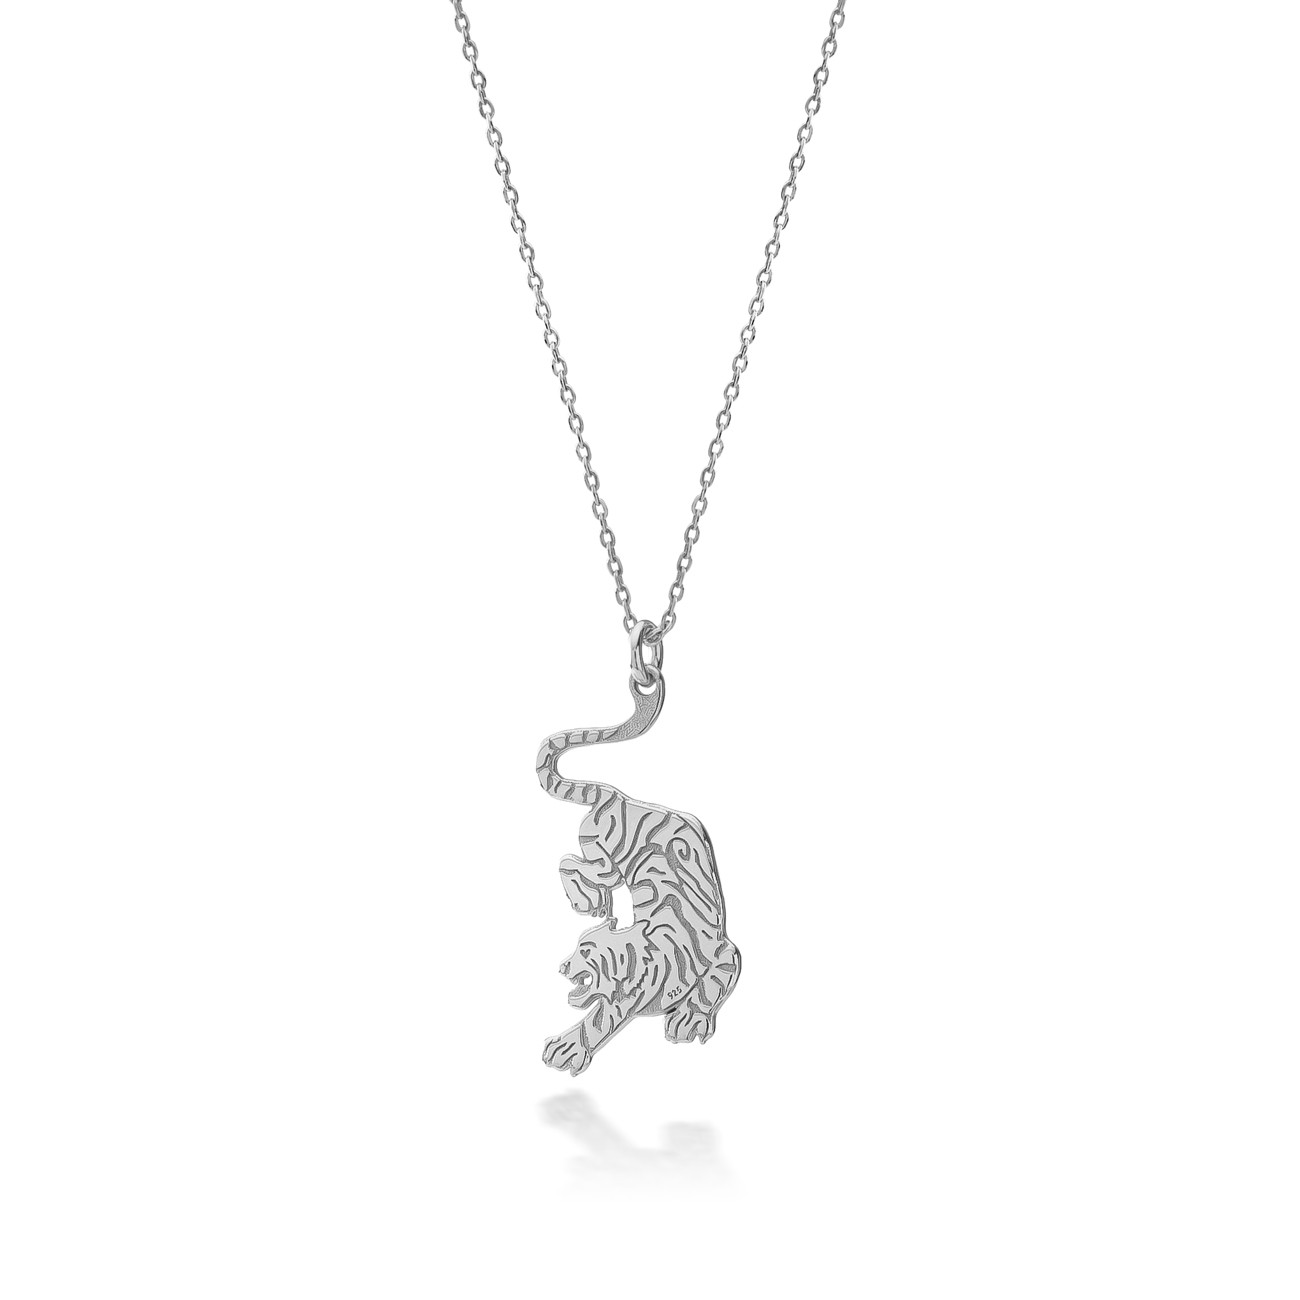 Silver tiger pendant necklace, AUGUSTYNKA x GIORRE